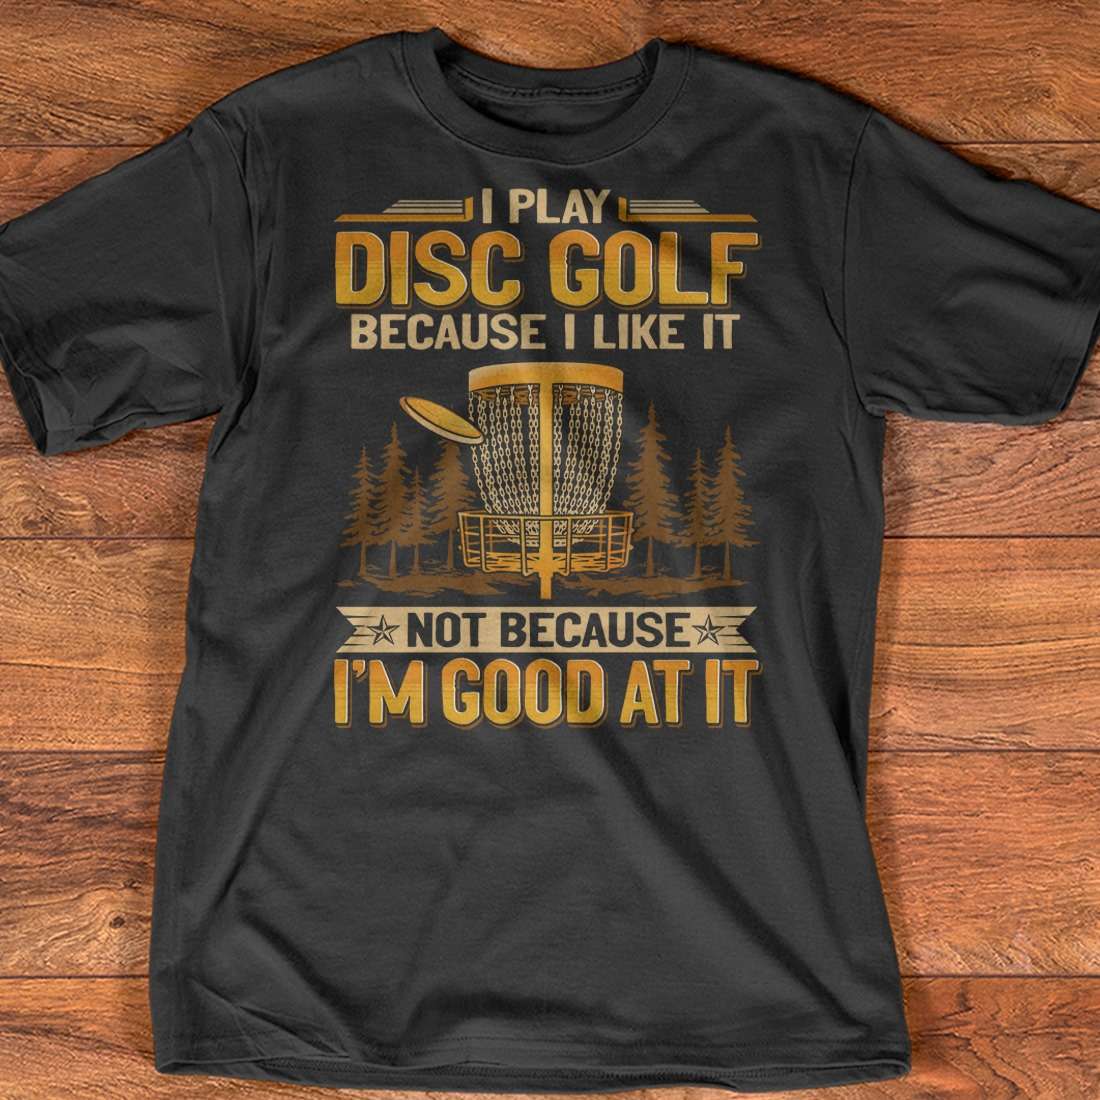 I play disc golf because I like it not because I'm good at it - Disc golf the sport, gift for disc golfer